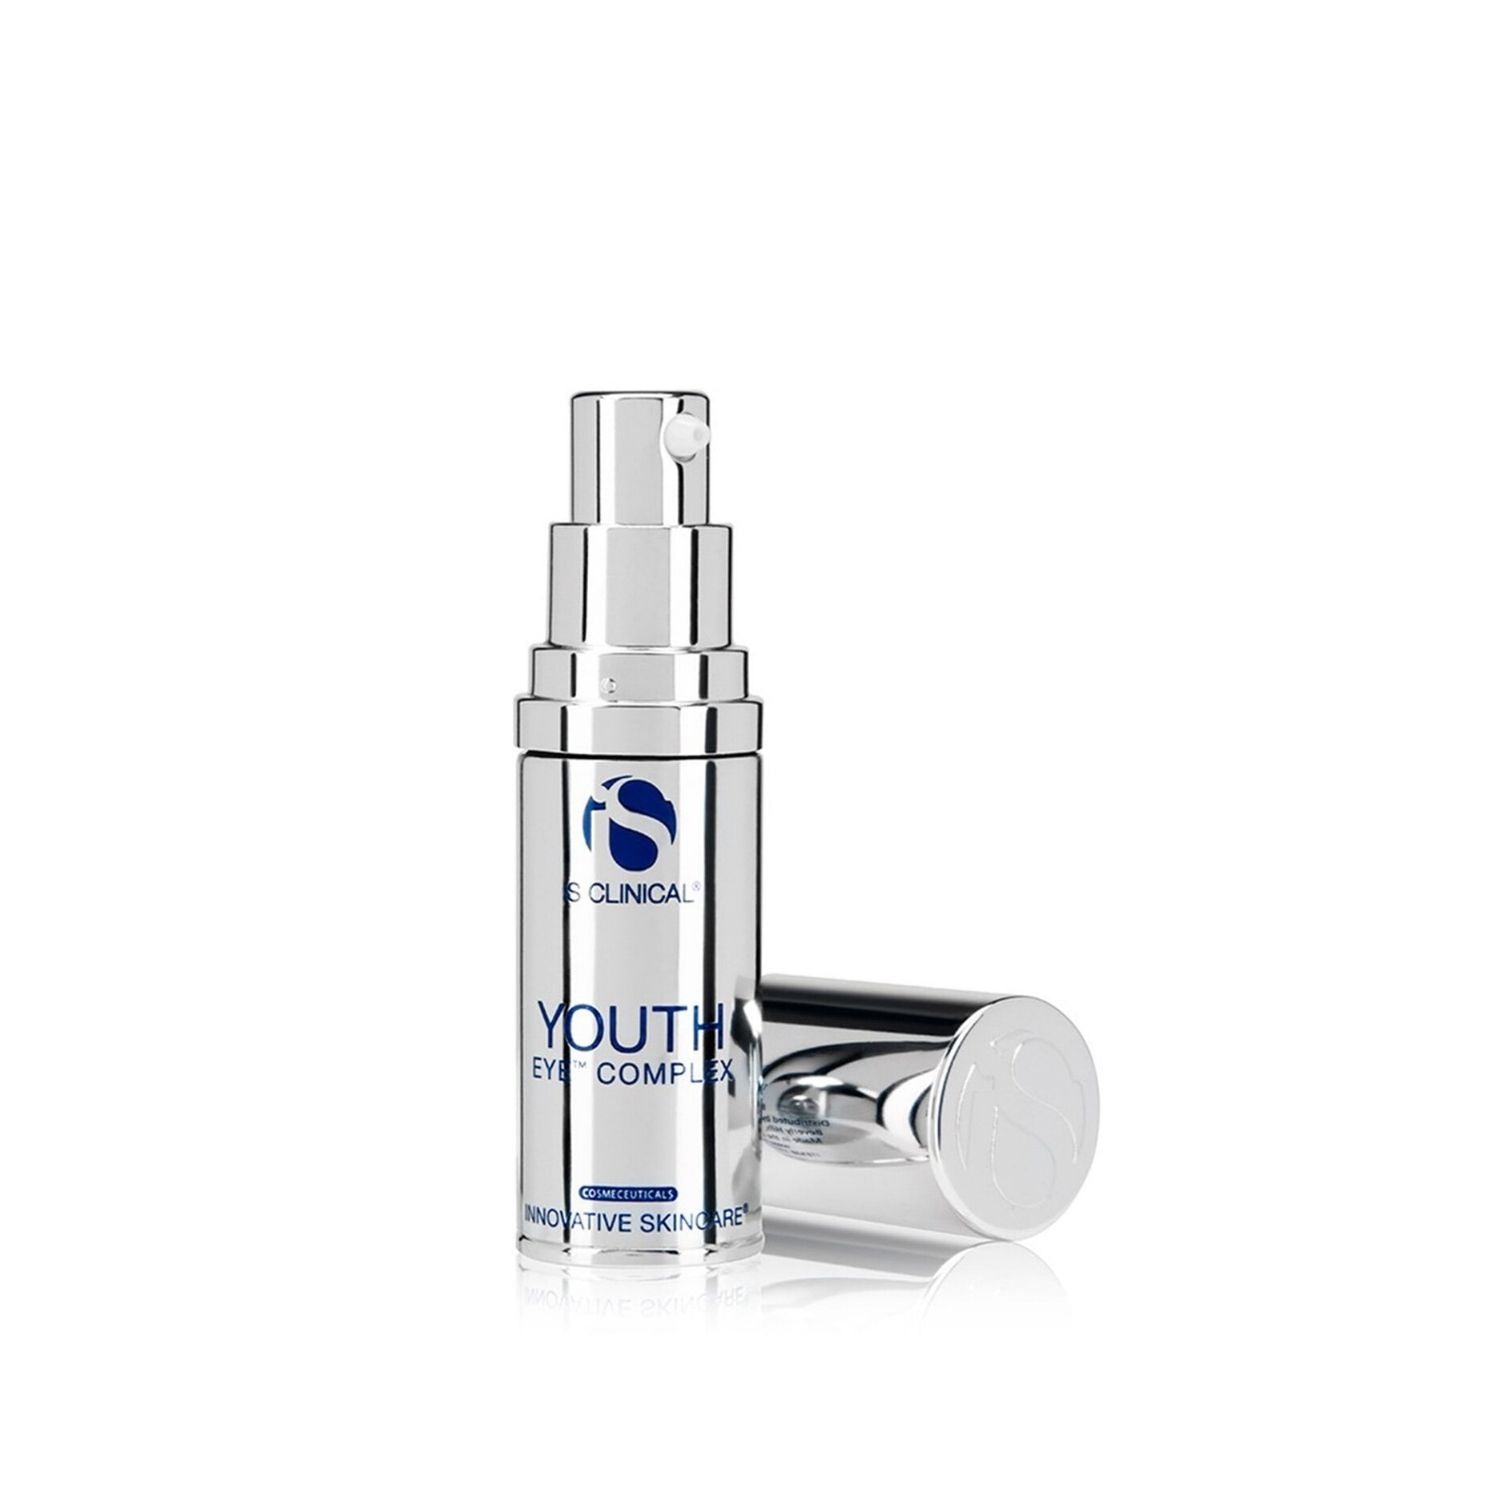 iS Clinical Youth Eye Complex 15g - Dr. Pen Store - iS Clinical Buy Genuine Dr Pen Products with Trust